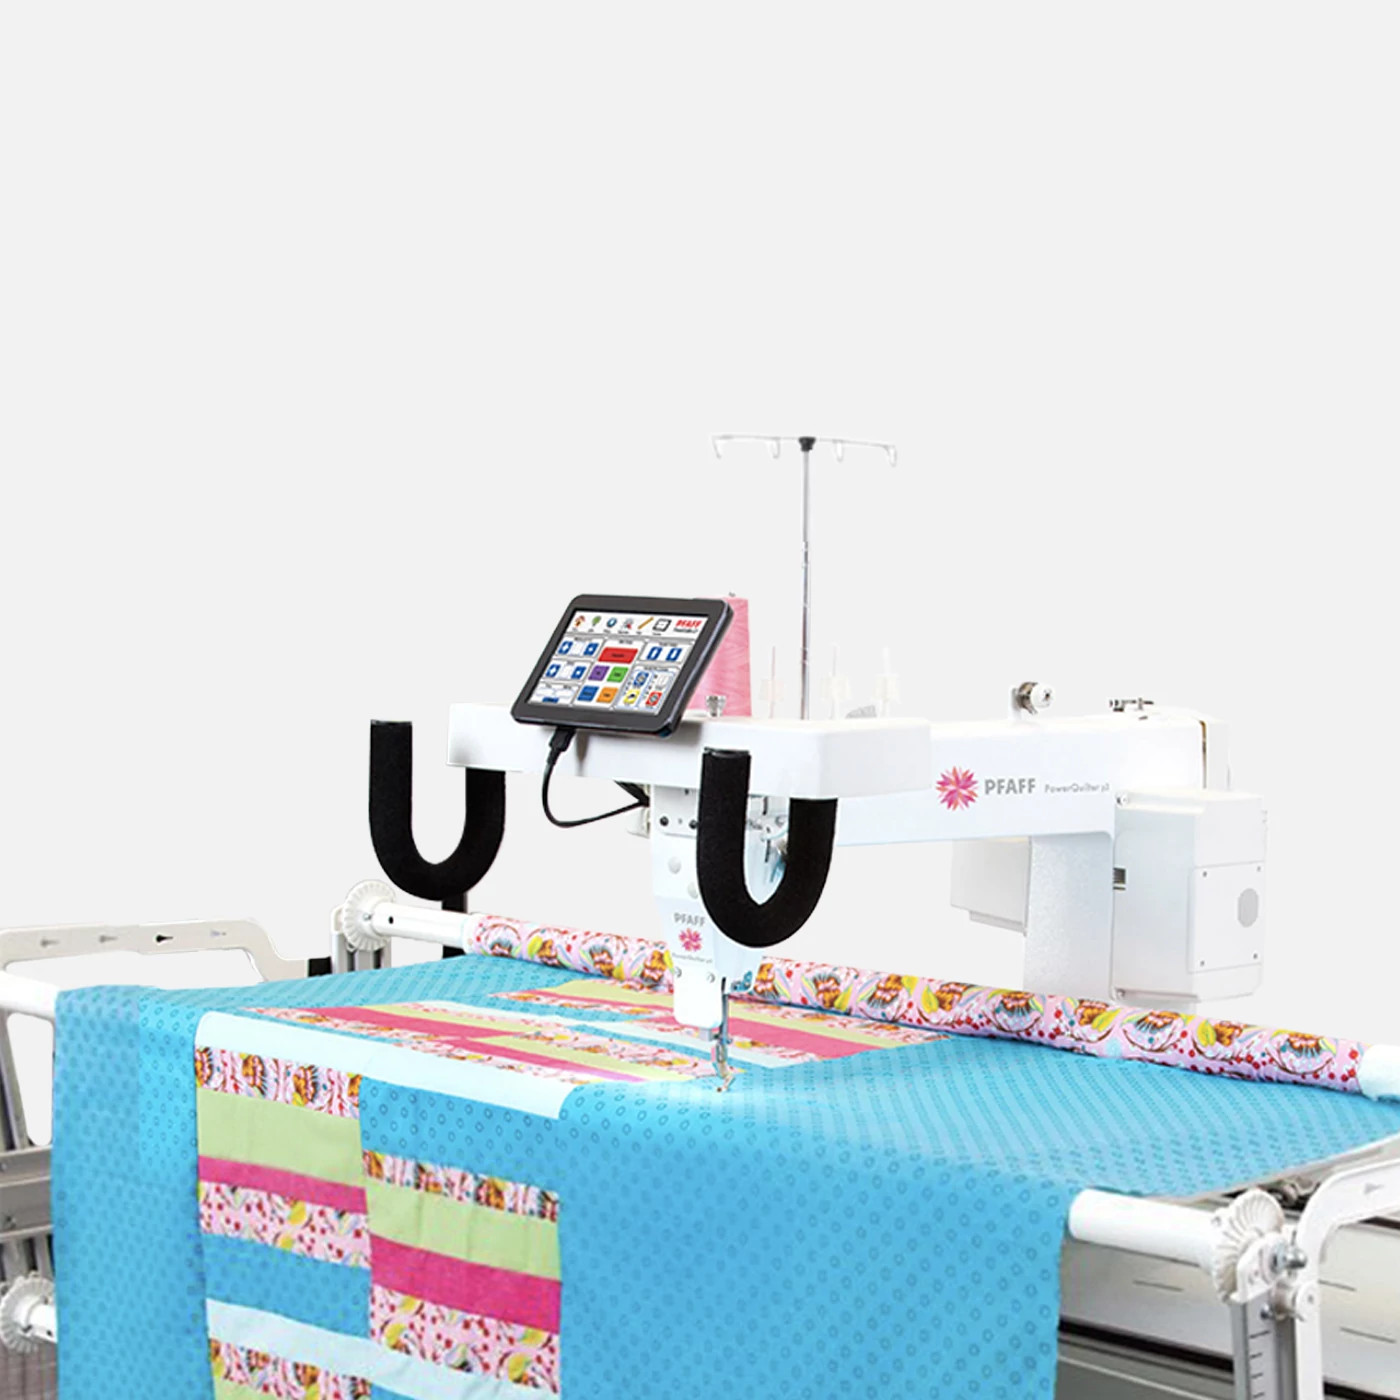 powerquilter™ p3 Long Arm Quilting Machine image